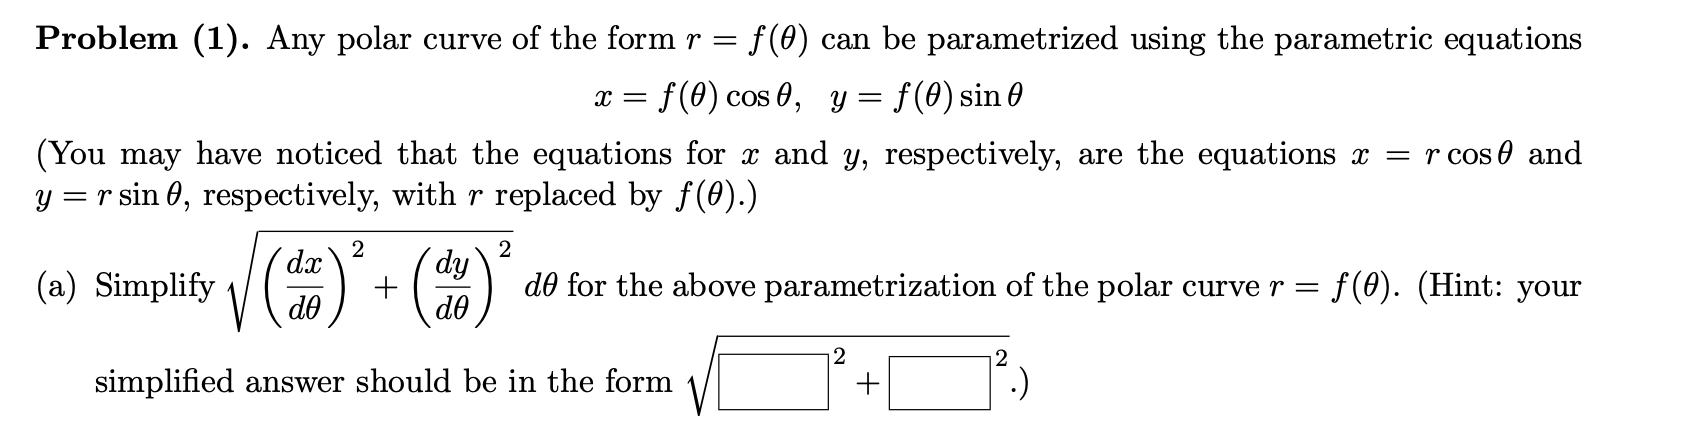 Problem (1). Any polar curve of the form r =
f (0) can be parametrized using the parametric equations
f(0) cos 0, y = f(0) sin 0
т—
(You may have noticed that the equations for x and y, respectively, are the equations x = r cos 0 and
y = r sin 0, respectively, with r replaced by f(0).)
2
d.x
´dy
(a) Simplify
d0 for the above parametrization of the polar curve r =
f(0). (Hint: your
do
do
2
simplified answer should be in the form
